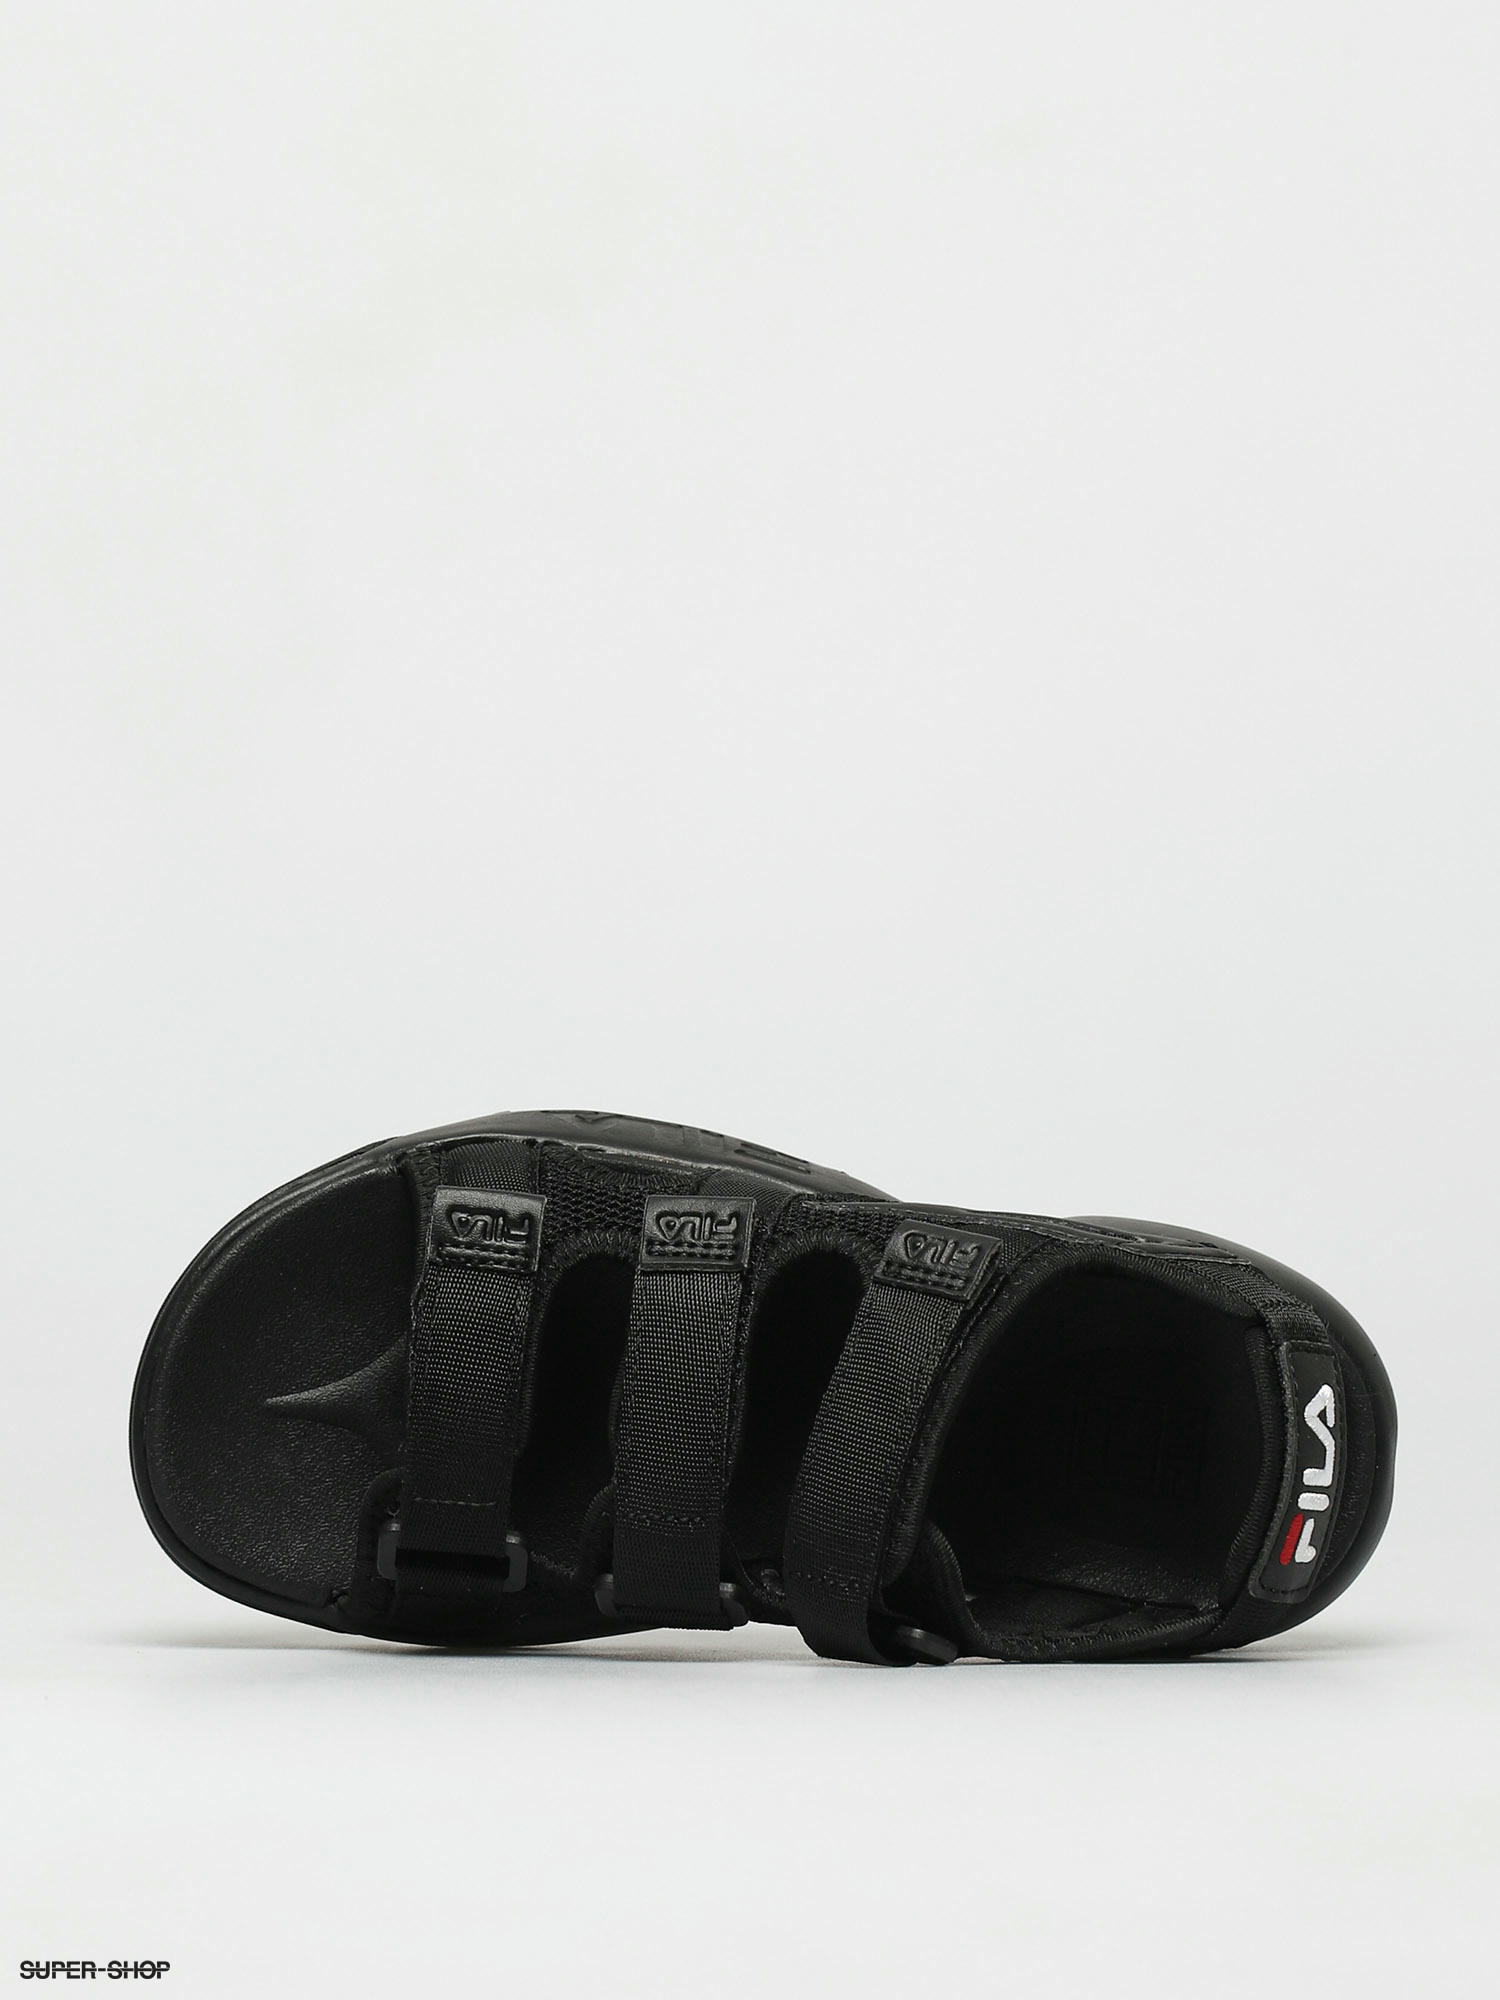 Buy Fila Willey Black Floater Sandals for Men at Best Price @ Tata CLiQ